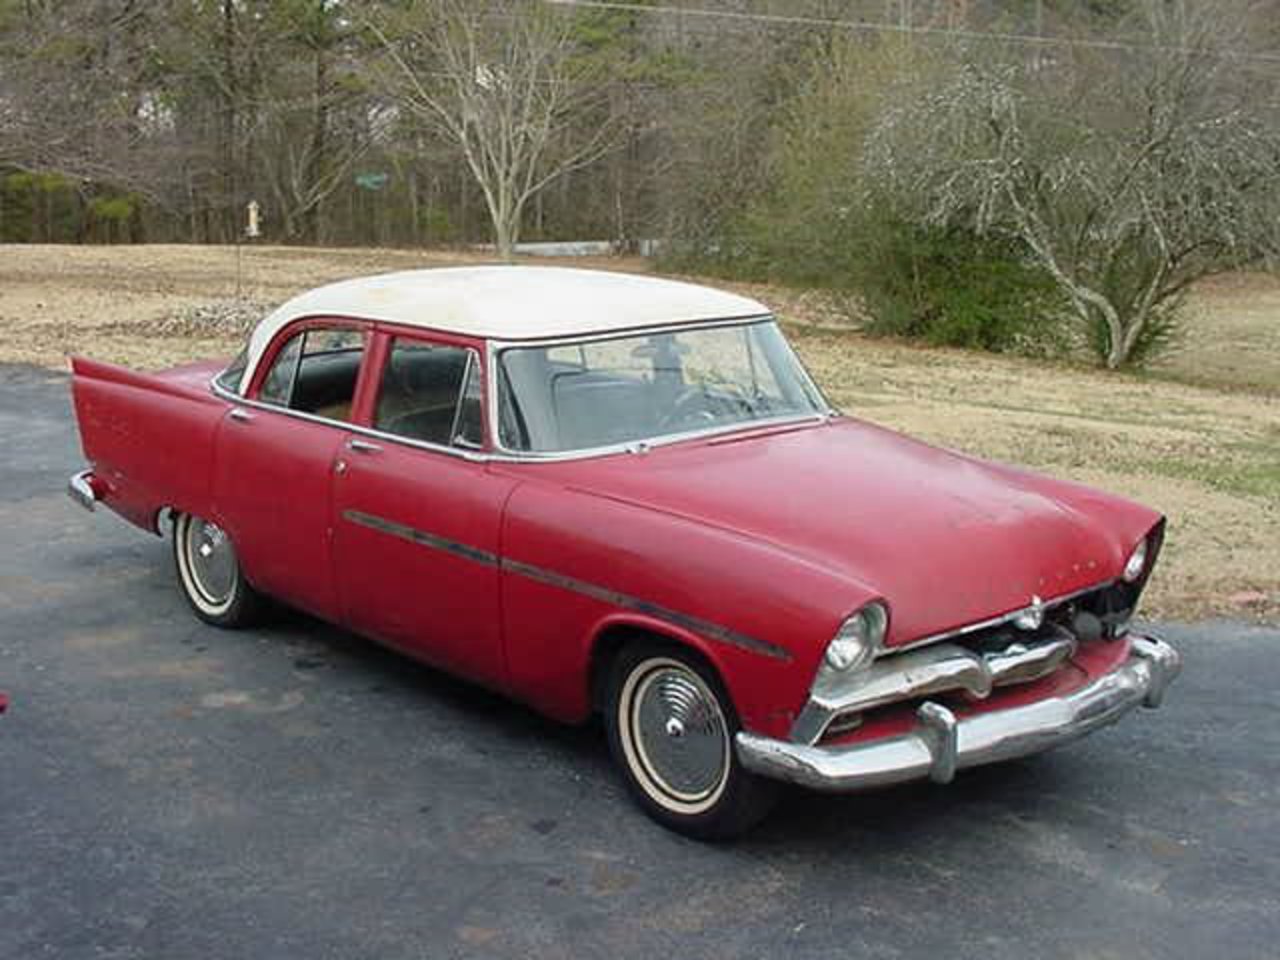 Your picture is of a 1956 Dodge Kingsway Deluxe.